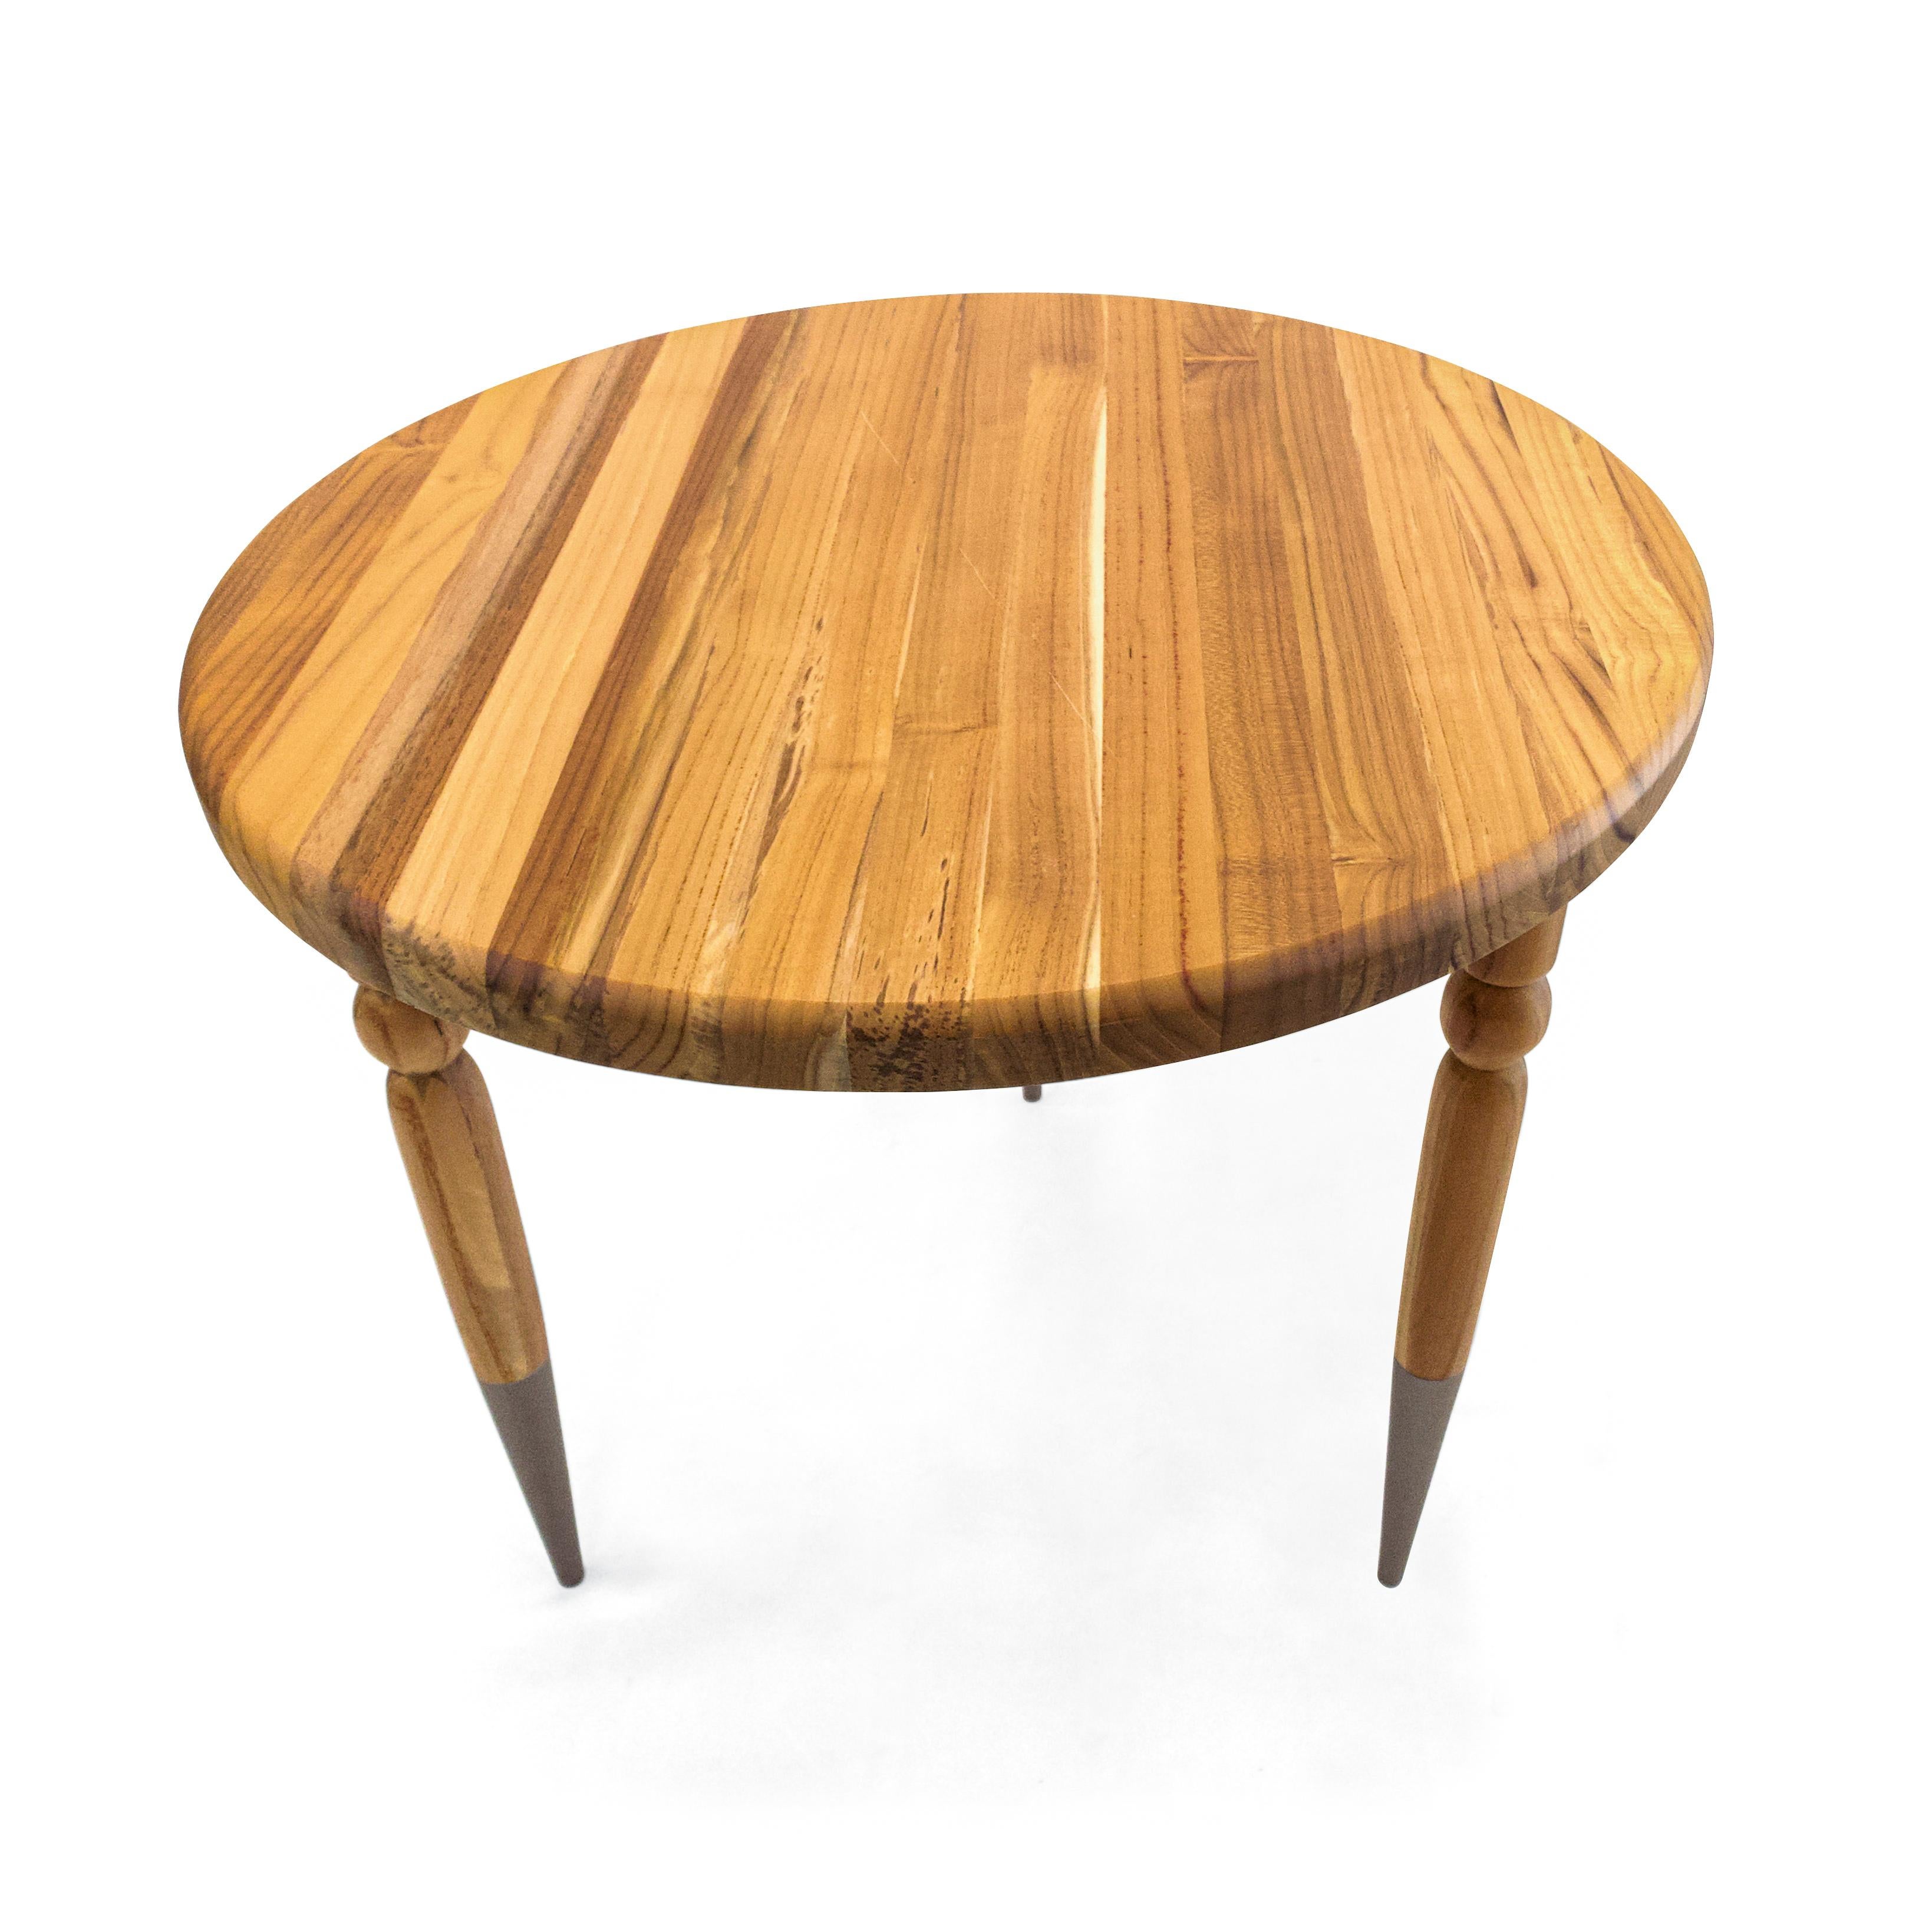 Palo Side Table in Teak Wood with Chocolate Turned Spindle Legs, Set of 3 For Sale 7